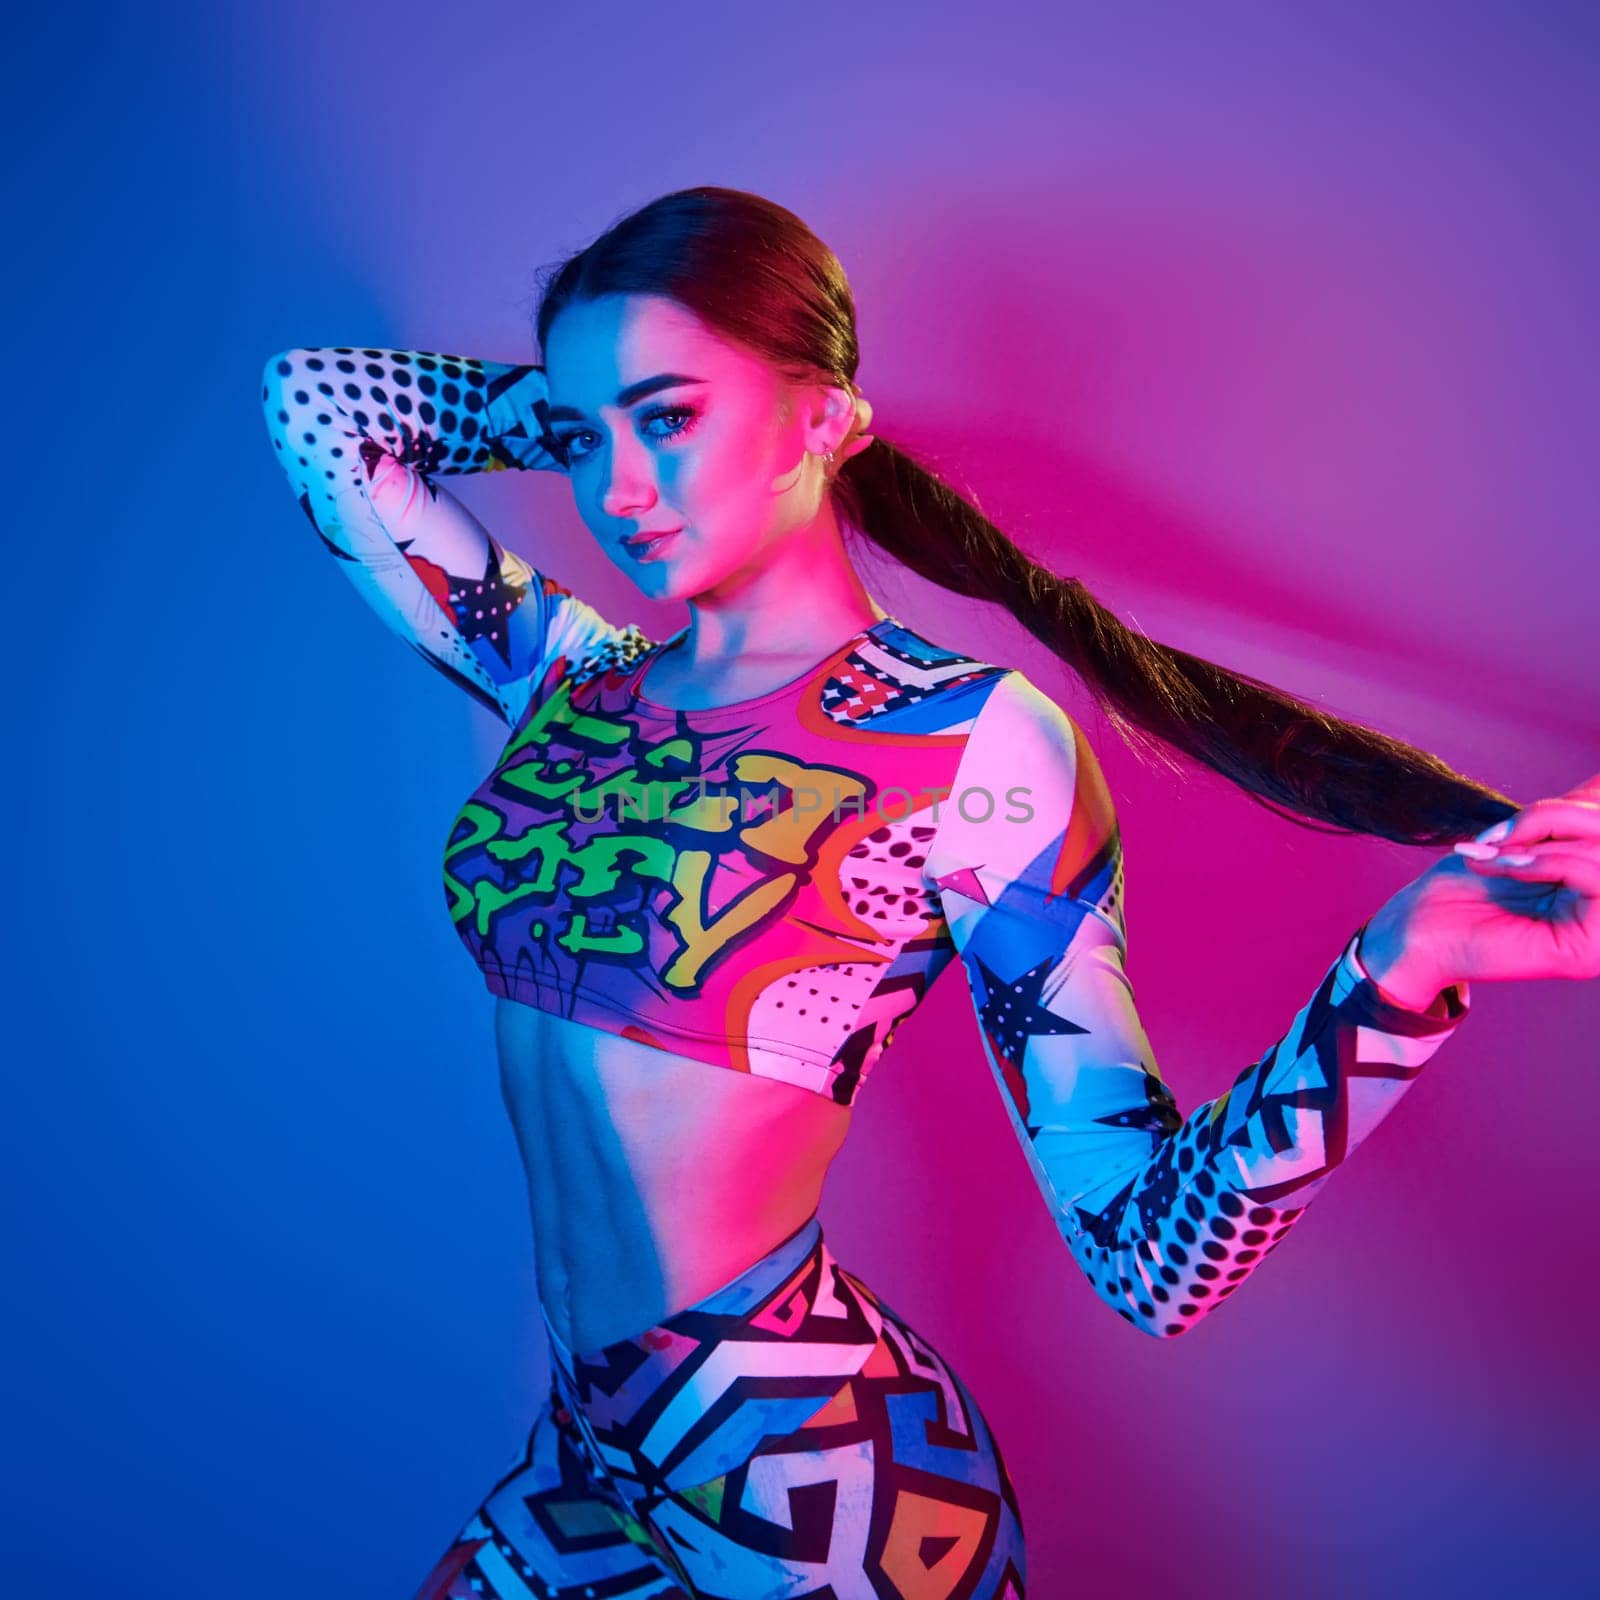 Fitness body type. Fashionable young woman standing in the studio with neon light by Standret